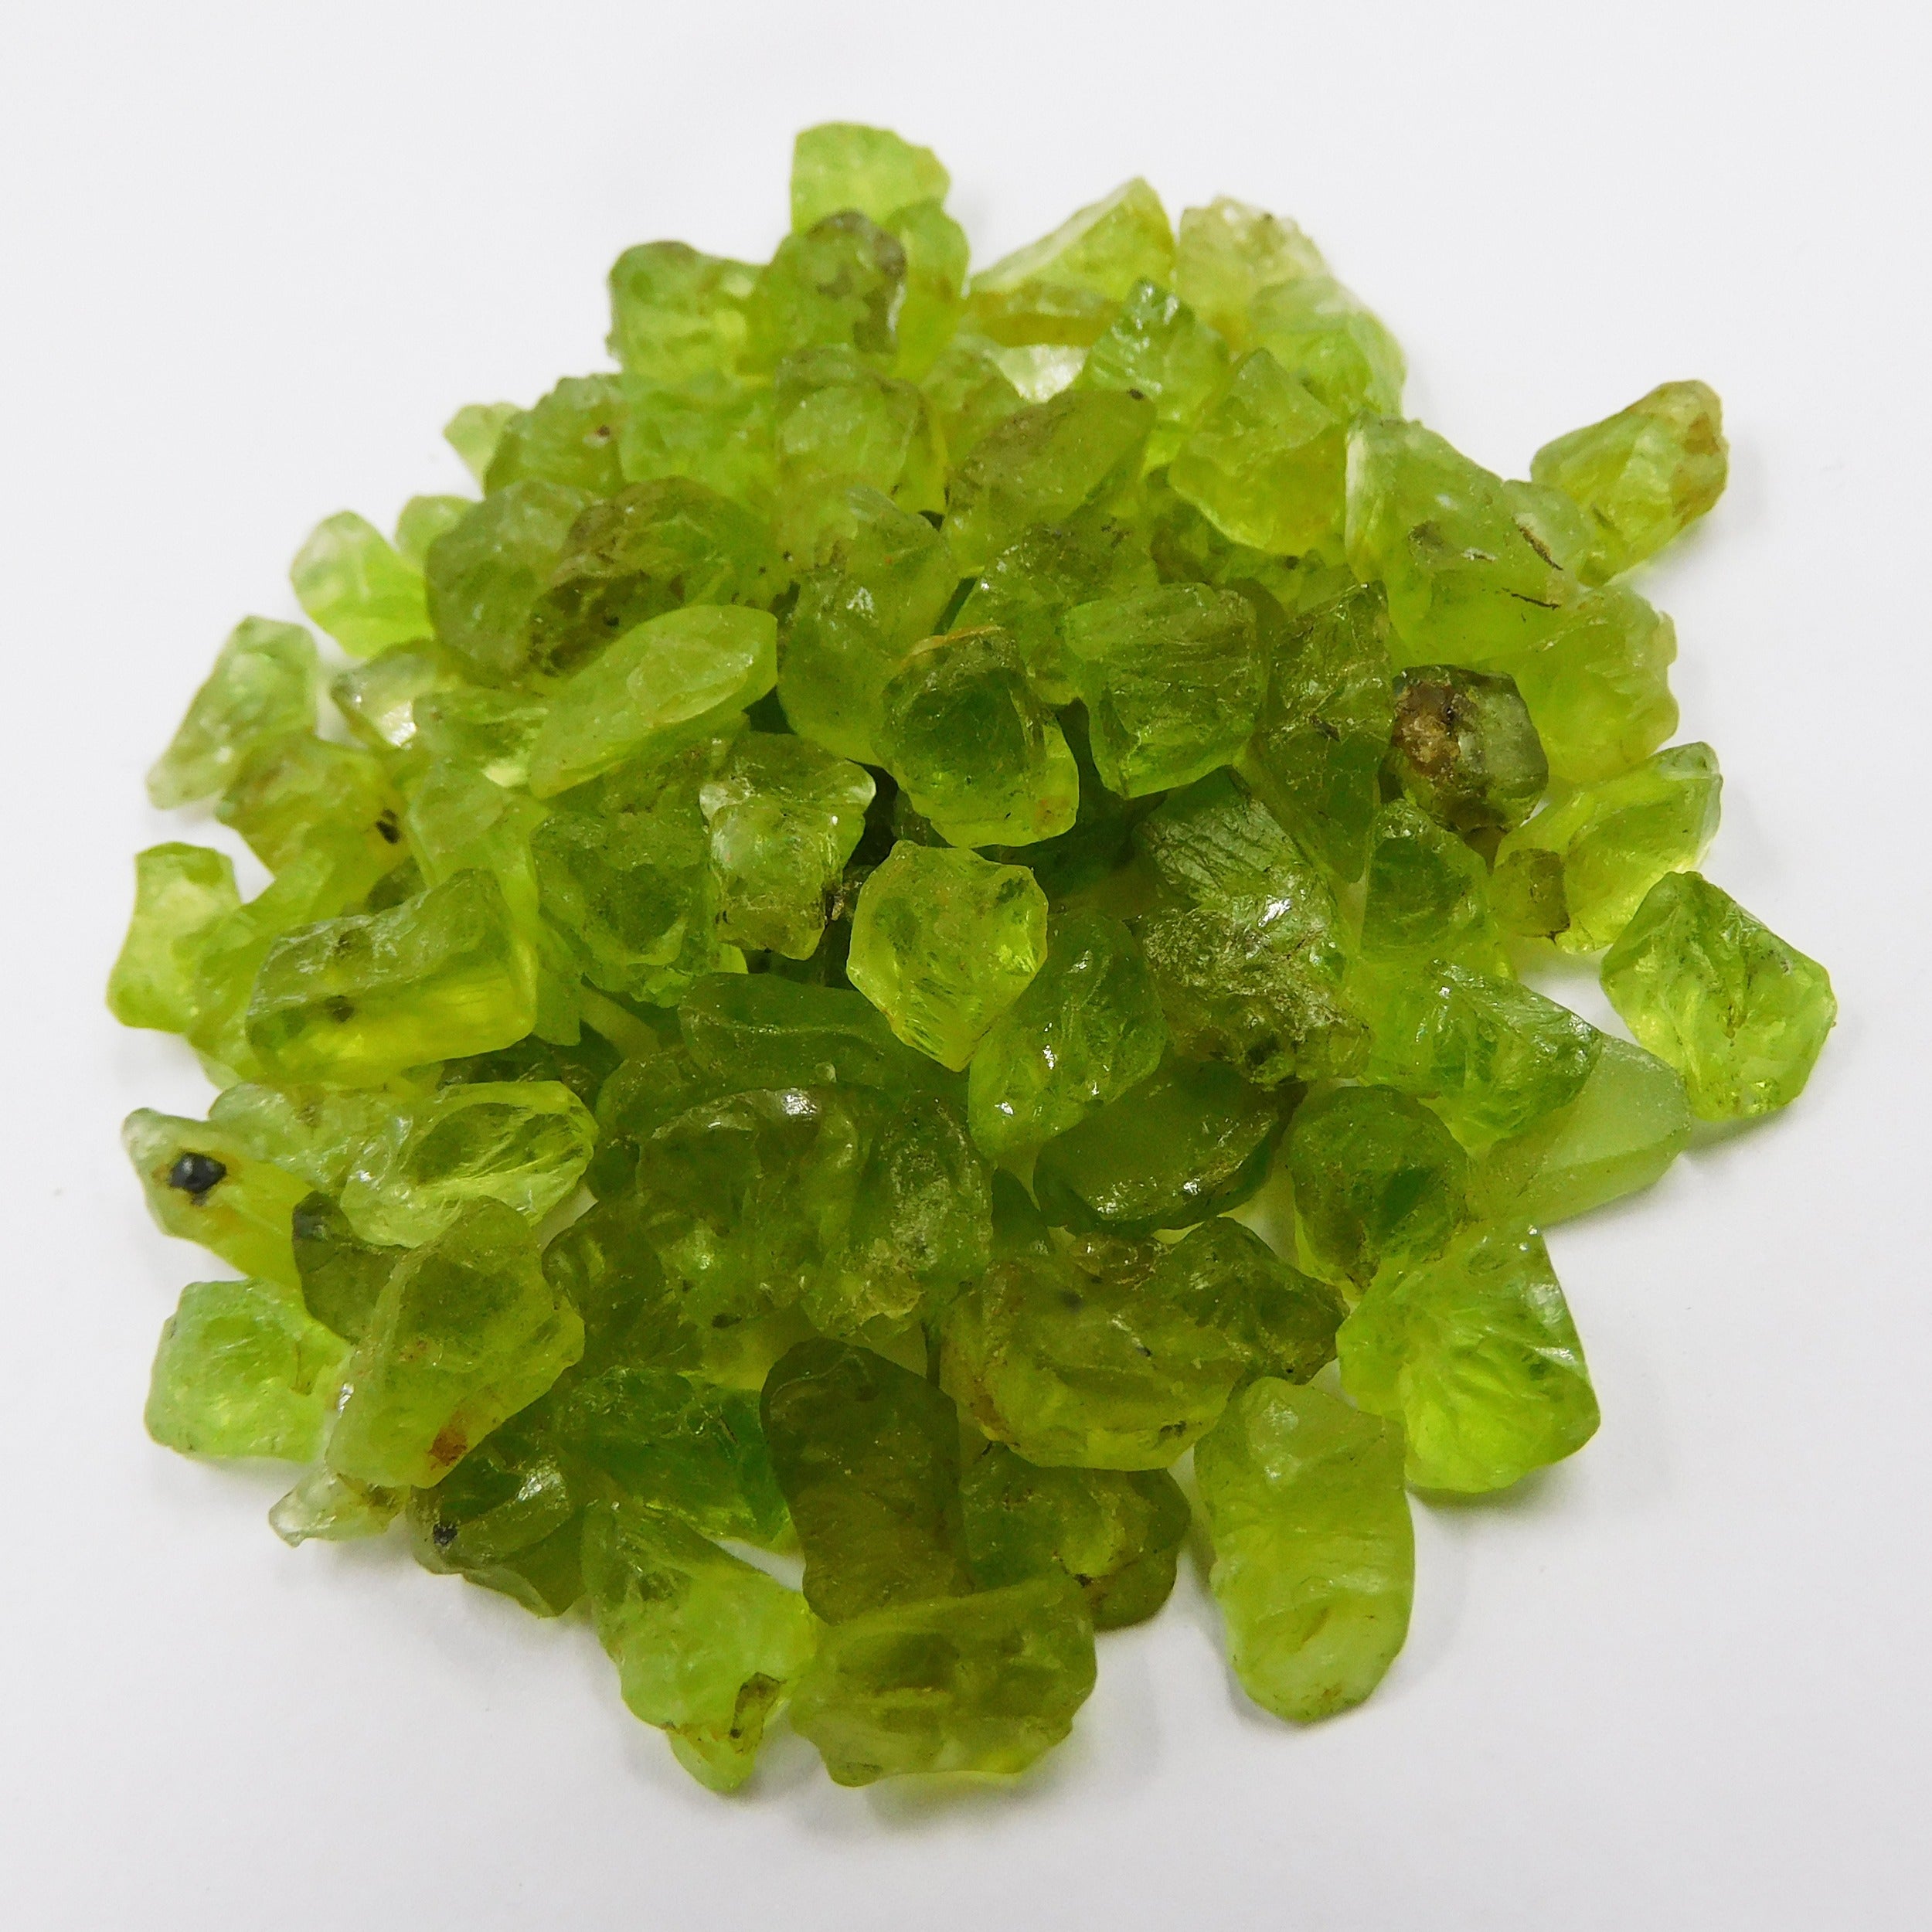 ON SALE !!! Peridot Lot 250 Ct A+ Quality Natural Green Peridot Uncut Raw Rough 13x8 Loose Gemstone Wholesale Lots | Free Delivery Free Gift -Peridot Best For Gift - Its trust Positivity Renewal Protection